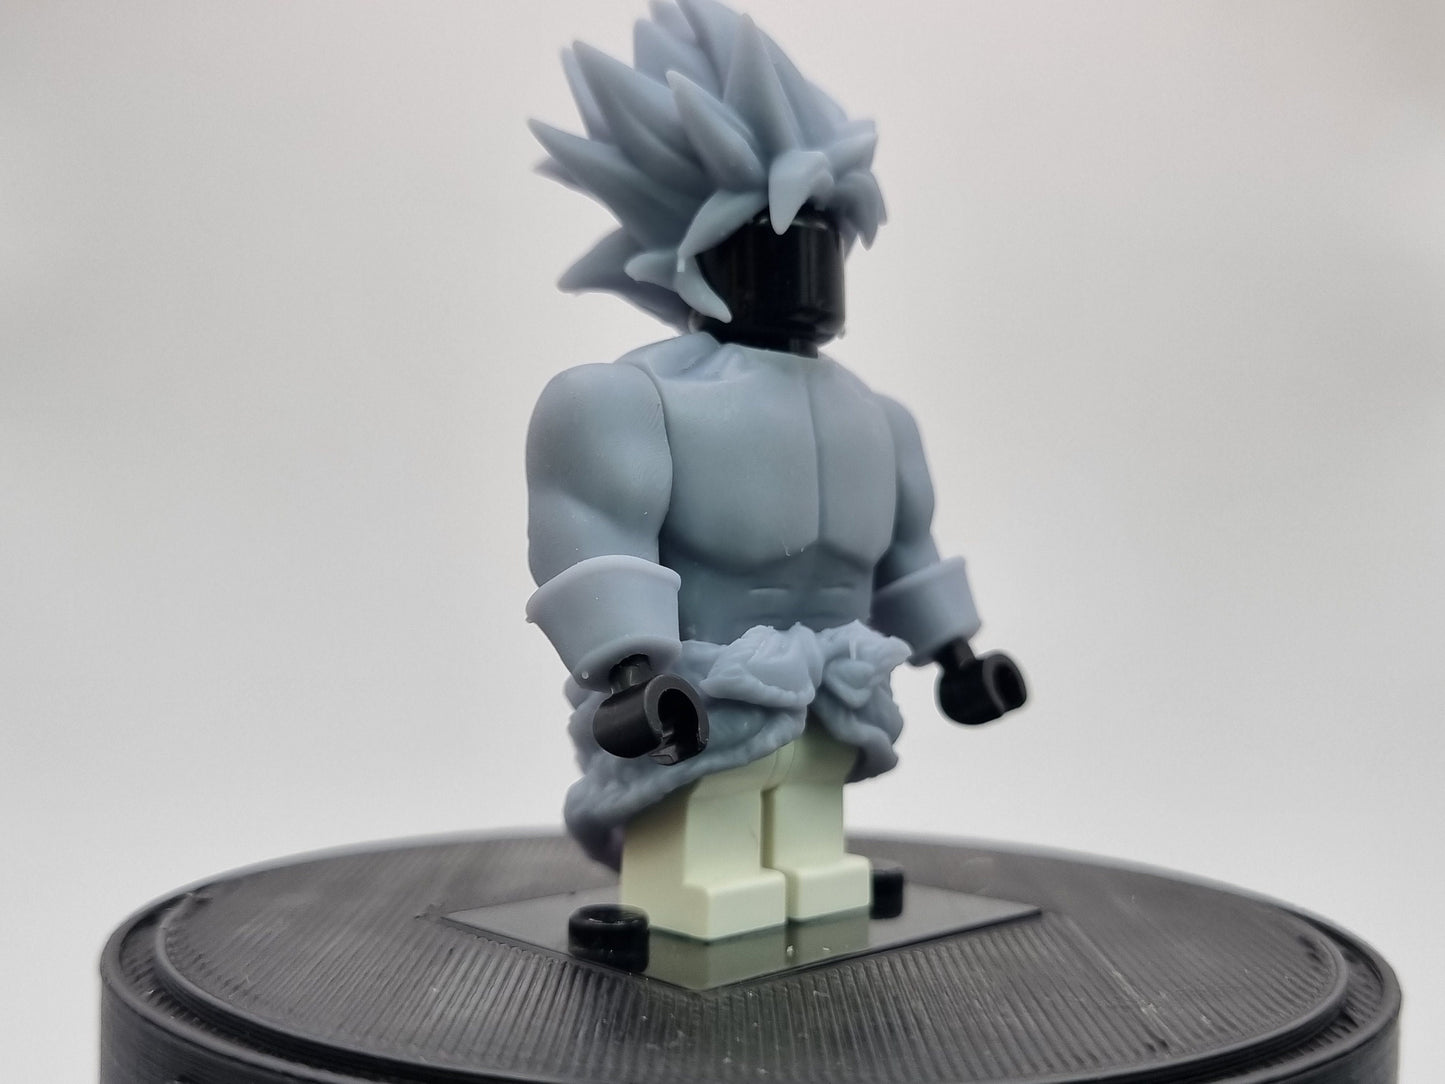 Building toy buffed guy with spikey hair!